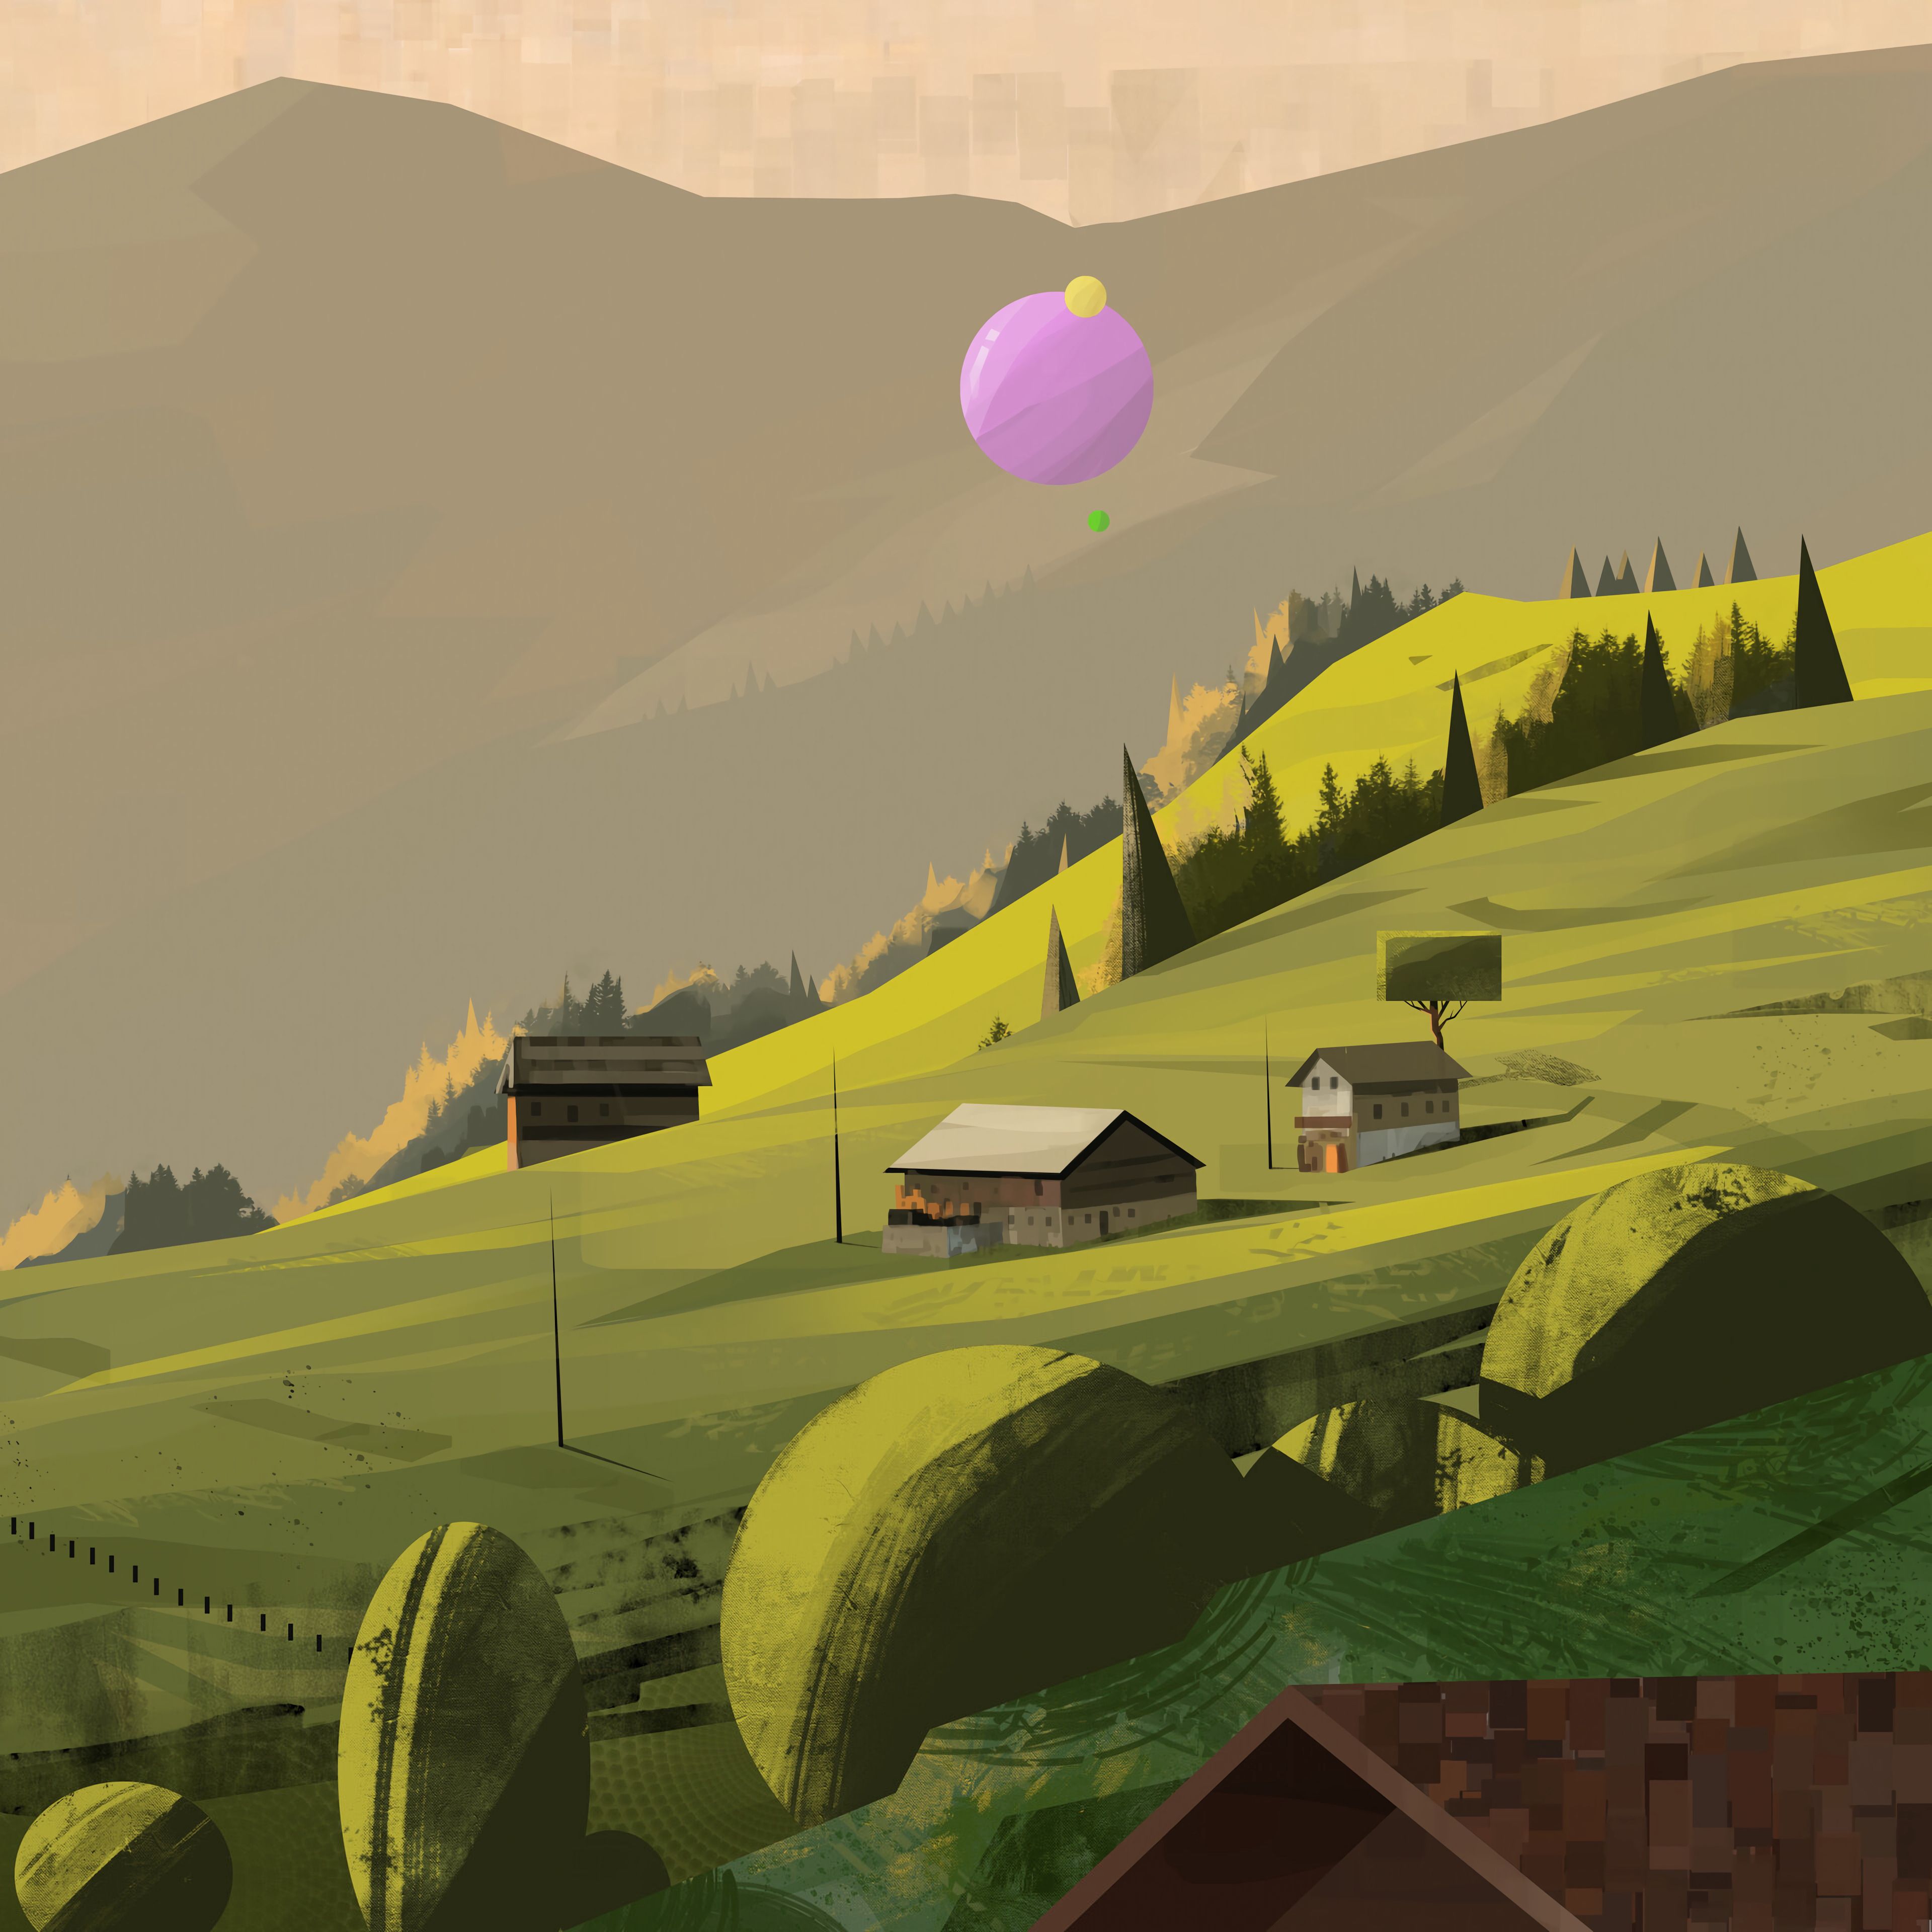 1920x1080 Background art, houses, trees, mountains, village, slope